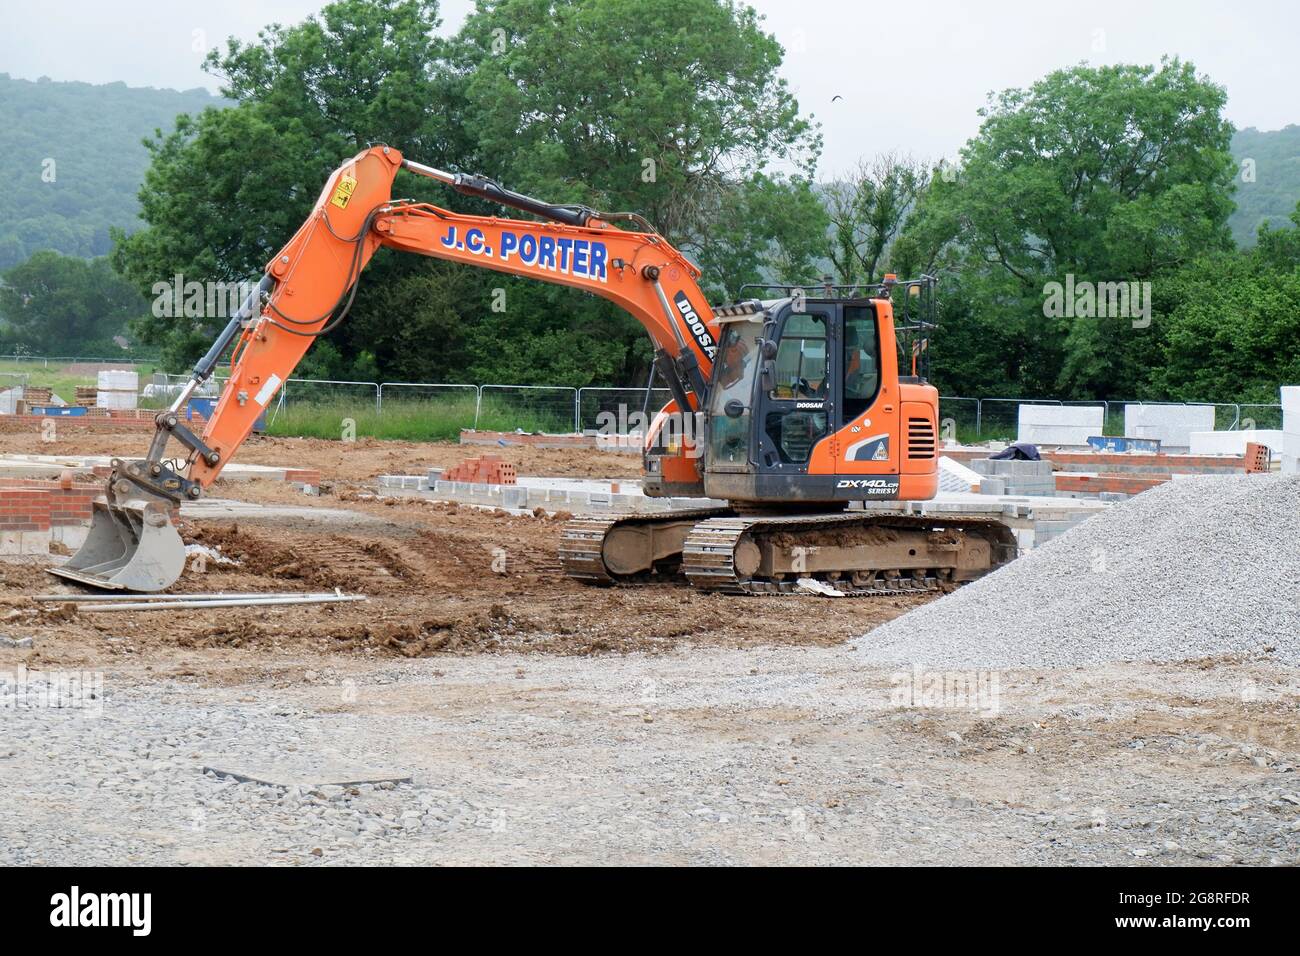 June 2021 - Large 360 hydraulic excavator parked on a new housing site in the rural Somerset village of Cheddar Stock Photo